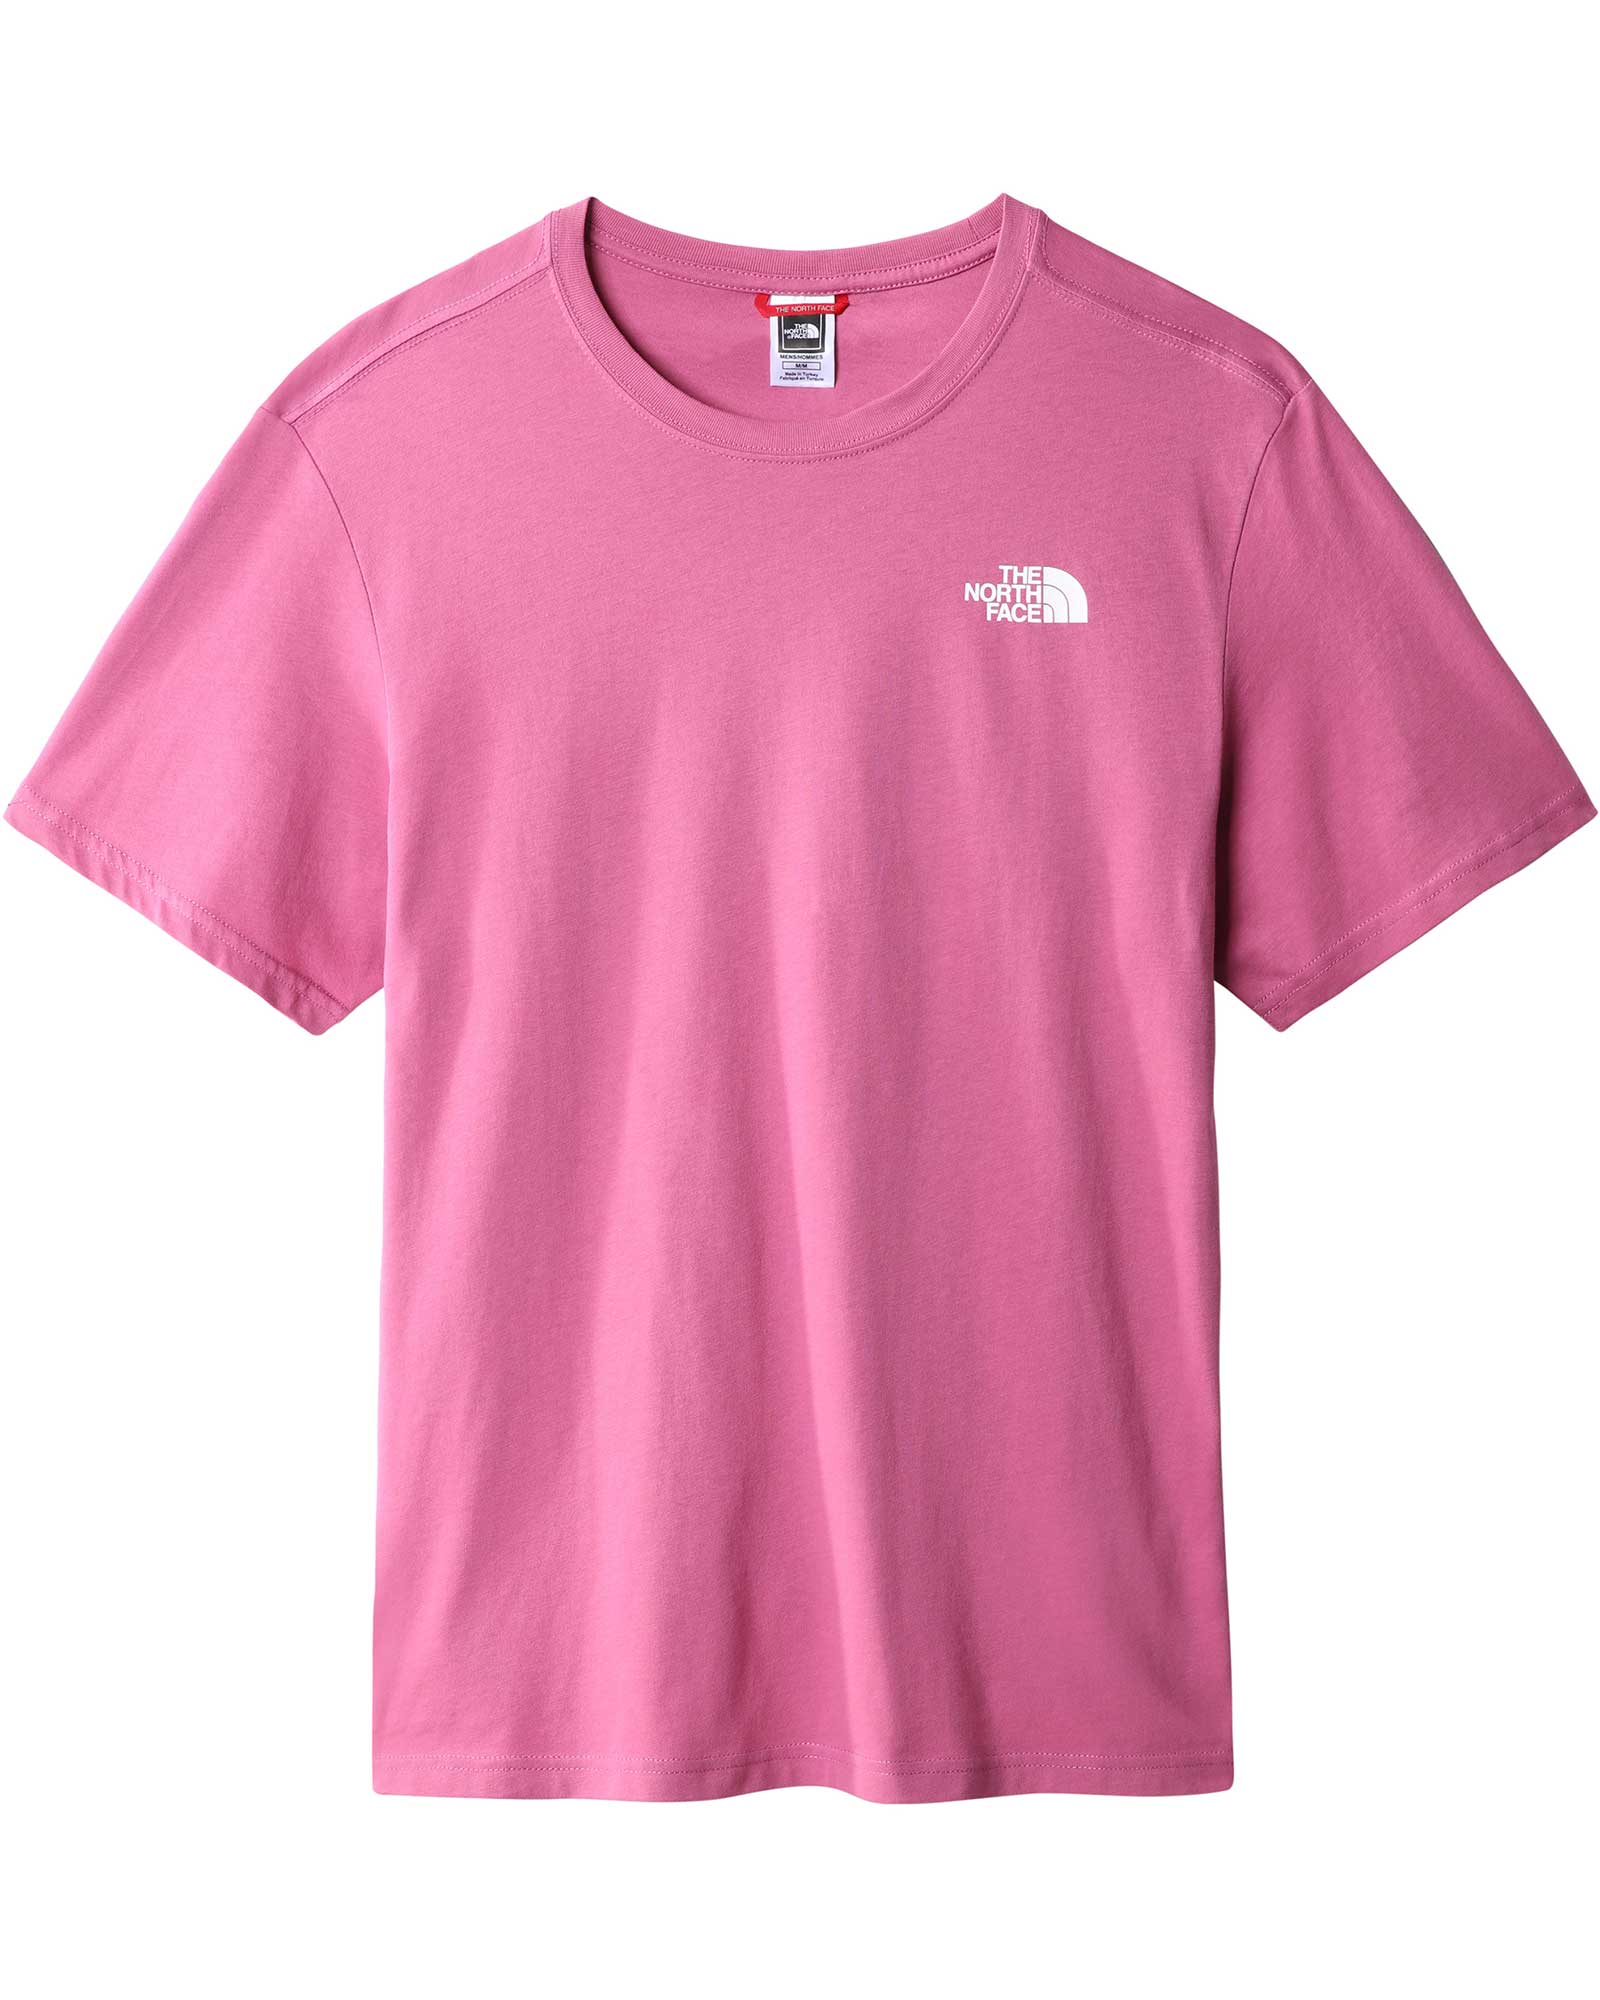 The North Face Red Box Men’s T Shirt - Red Violet S